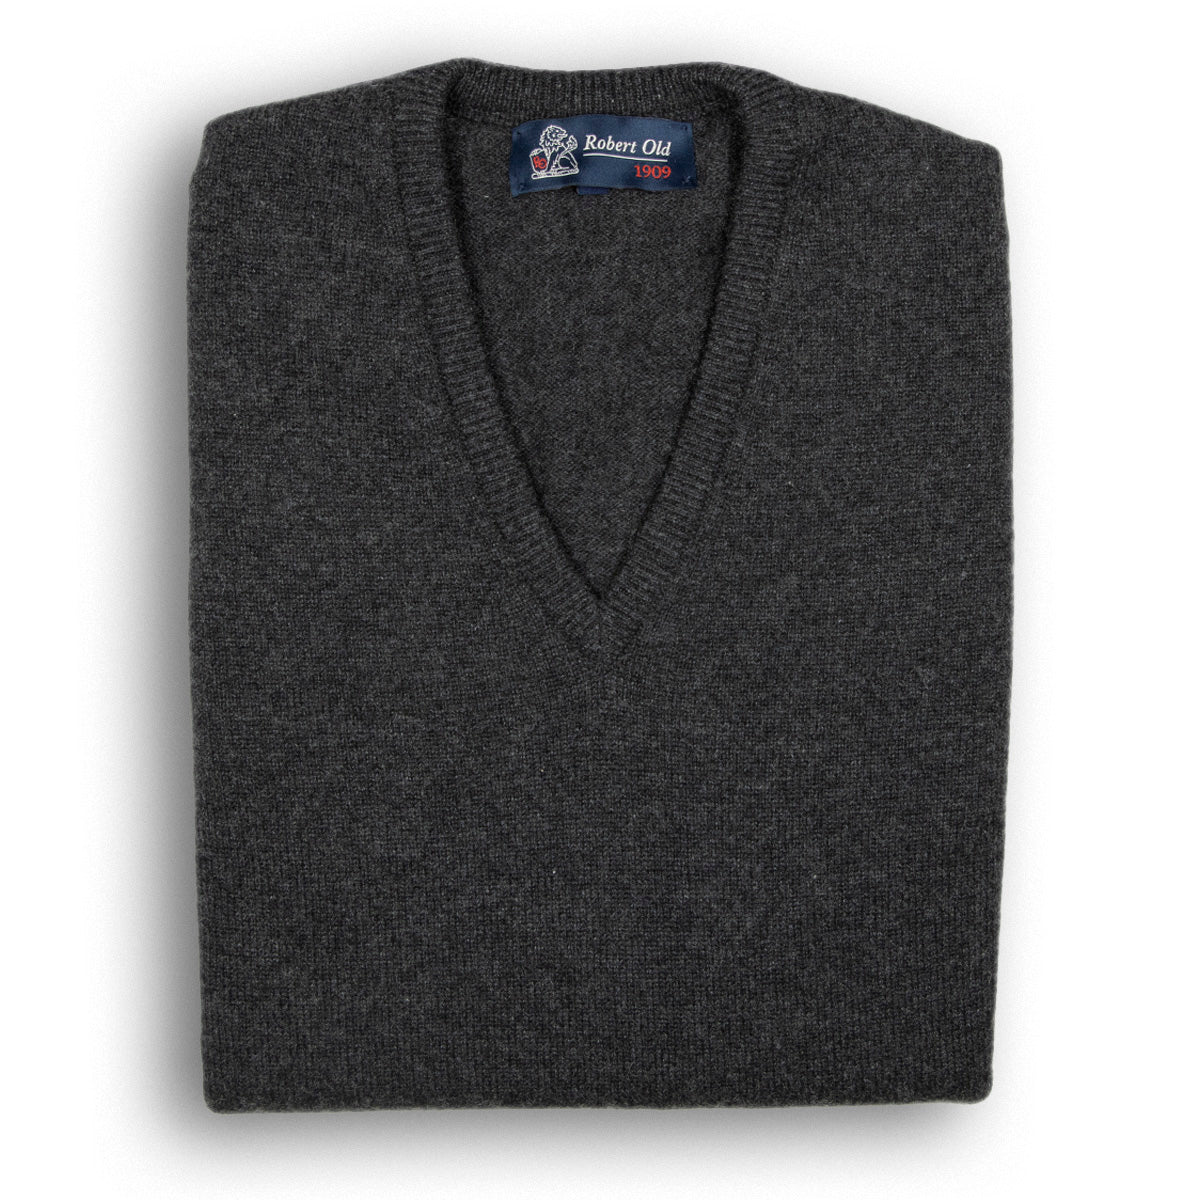 Charcoal Tobermorey 4ply V-Neck Cashmere Sweater  Robert Old Charcoal UK 36" 